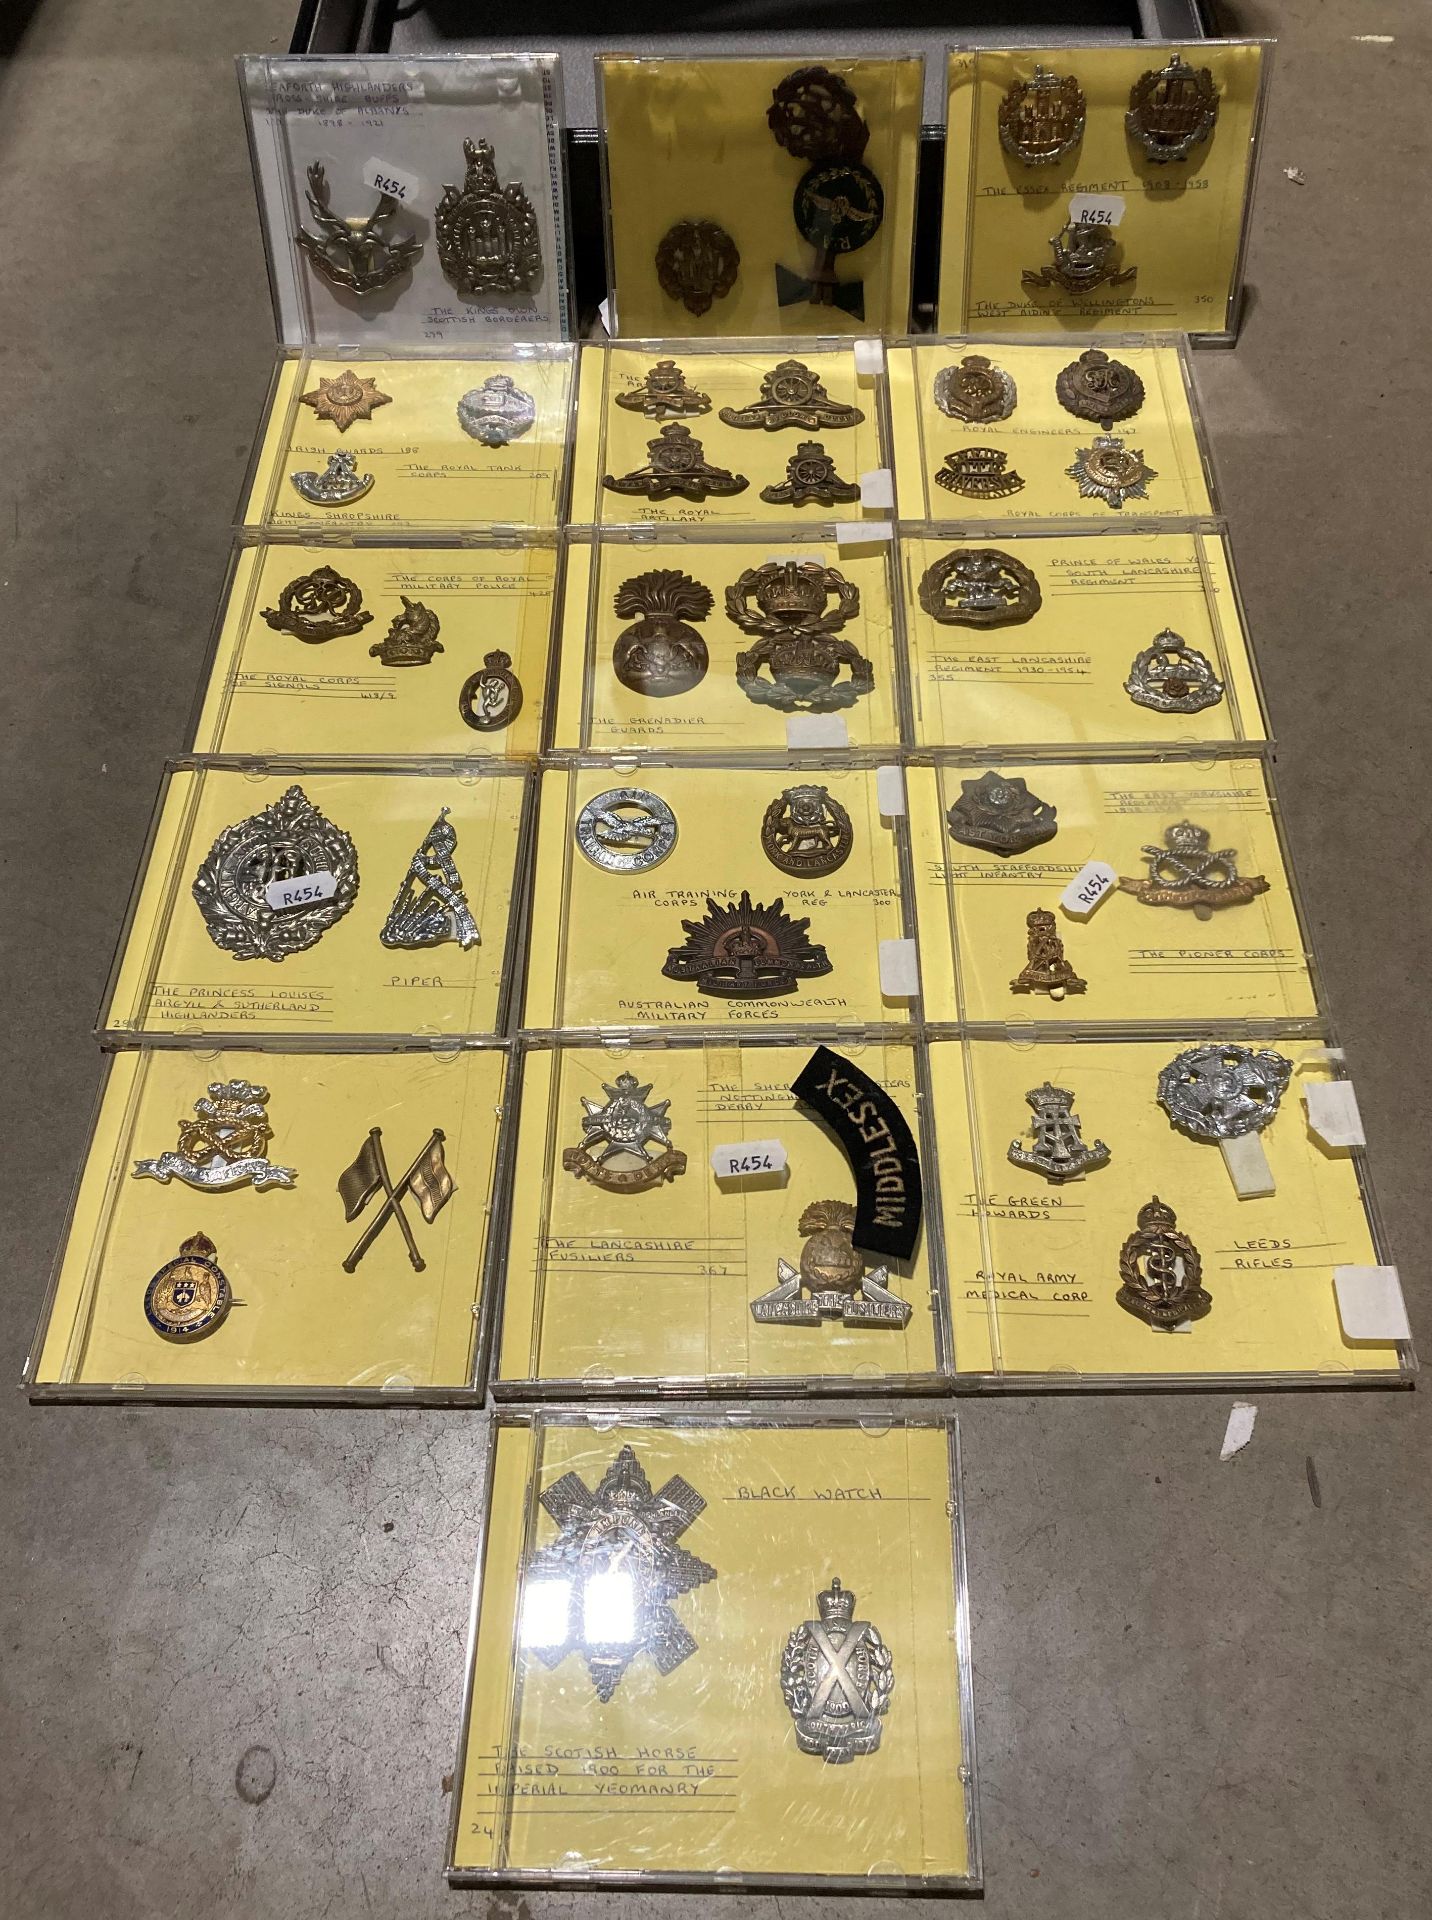 Briefcase and contents - 45 cap badges set in CD cases - mainly British Military and Air Force